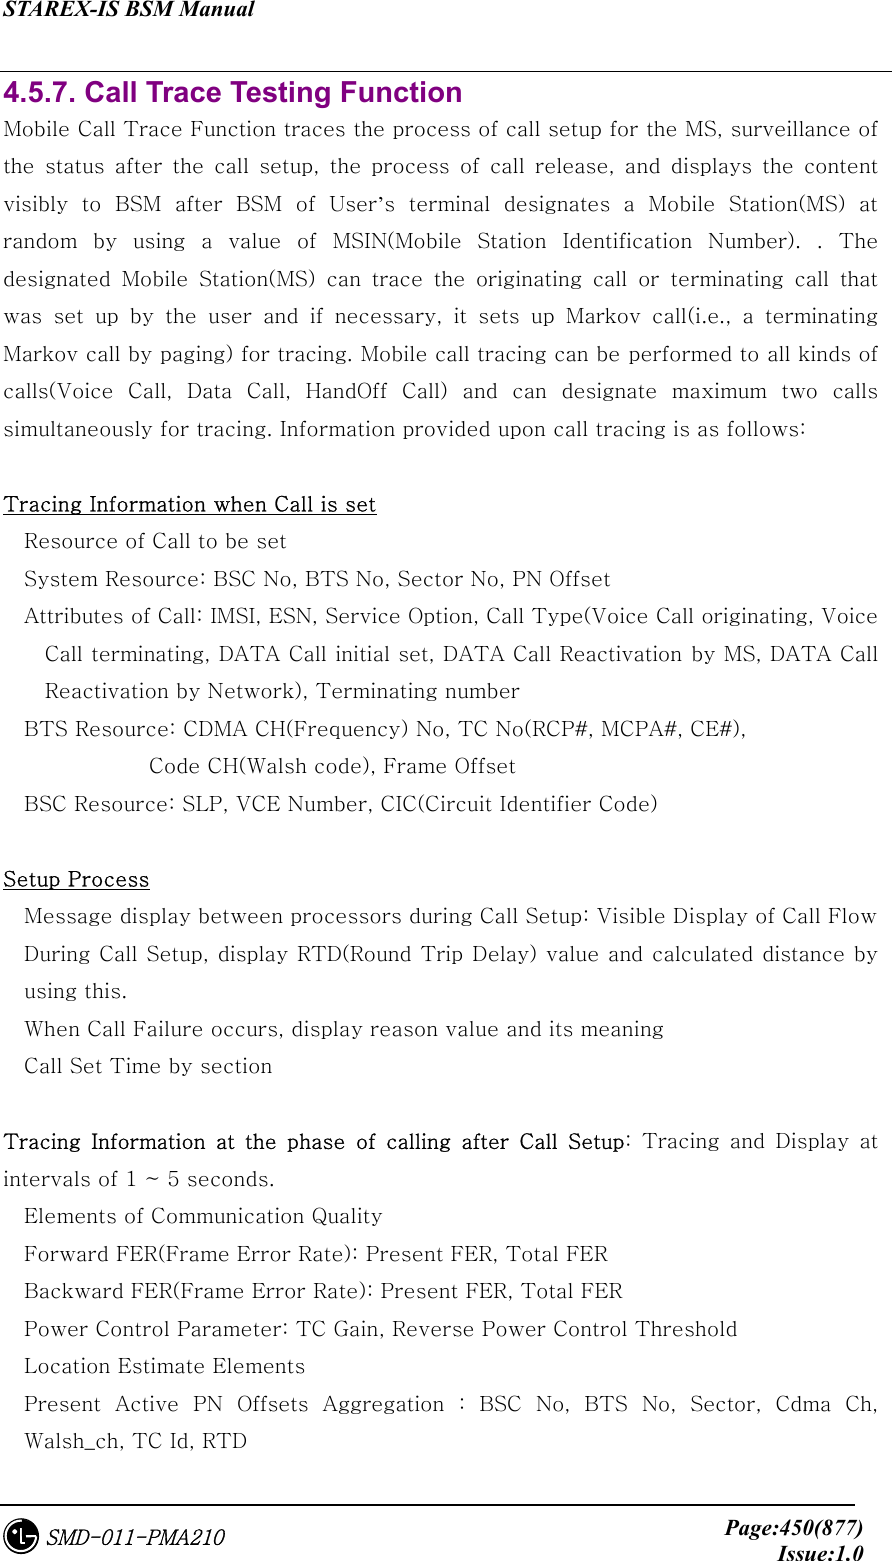 STAREX-IS BSM Manual     Page:450(877)Issue:1.0SMD-011-PMA210 4.5.7. Call Trace Testing Function Mobile Call Trace Function traces the process of call setup for the MS, surveillance of the  status  after  the  call  setup,  the  process  of  call  release,  and  displays  the  content visibly to BSM after BSM of User’s  terminal  designates  a  Mobile  Station(MS)  at random  by  using  a  value  of  MSIN(Mobile  Station  Identification  Number). . The designated Mobile Station(MS) can trace the originating call or  terminating  call  that was  set  up  by  the  user  and  if  necessary,  it  sets  up  Markov  call(i.e.,  a  terminating Markov call by paging) for tracing. Mobile call tracing can be performed to all kinds of calls(Voice  Call,  Data  Call,  HandOff  Call)  and  can  designate  maximum  two  calls simultaneously for tracing. Information provided upon call tracing is as follows:  Tracing Information when Call is set Resource of Call to be set System Resource: BSC No, BTS No, Sector No, PN Offset Attributes of Call: IMSI, ESN, Service Option, Call Type(Voice Call originating, Voice Call terminating, DATA Call initial set, DATA Call Reactivation by MS, DATA Call Reactivation by Network), Terminating number BTS Resource: CDMA CH(Frequency) No, TC No(RCP#, MCPA#, CE#),   Code CH(Walsh code), Frame Offset BSC Resource: SLP, VCE Number, CIC(Circuit Identifier Code)    Setup Process Message display between processors during Call Setup: Visible Display of Call Flow   During Call Setup, display RTD(Round Trip Delay) value and calculated distance by using this.     When Call Failure occurs, display reason value and its meaning Call Set Time by section      Tracing  Information  at  the  phase  of  calling  after  Call  Setup:  Tracing  and  Display  at intervals of 1 ~ 5 seconds. Elements of Communication Quality   Forward FER(Frame Error Rate): Present FER, Total FER Backward FER(Frame Error Rate): Present FER, Total FER Power Control Parameter: TC Gain, Reverse Power Control Threshold Location Estimate Elements Present  Active  PN  Offsets  Aggregation  :  BSC  No,  BTS  No,  Sector, Cdma Ch, Walsh_ch, TC Id, RTD 